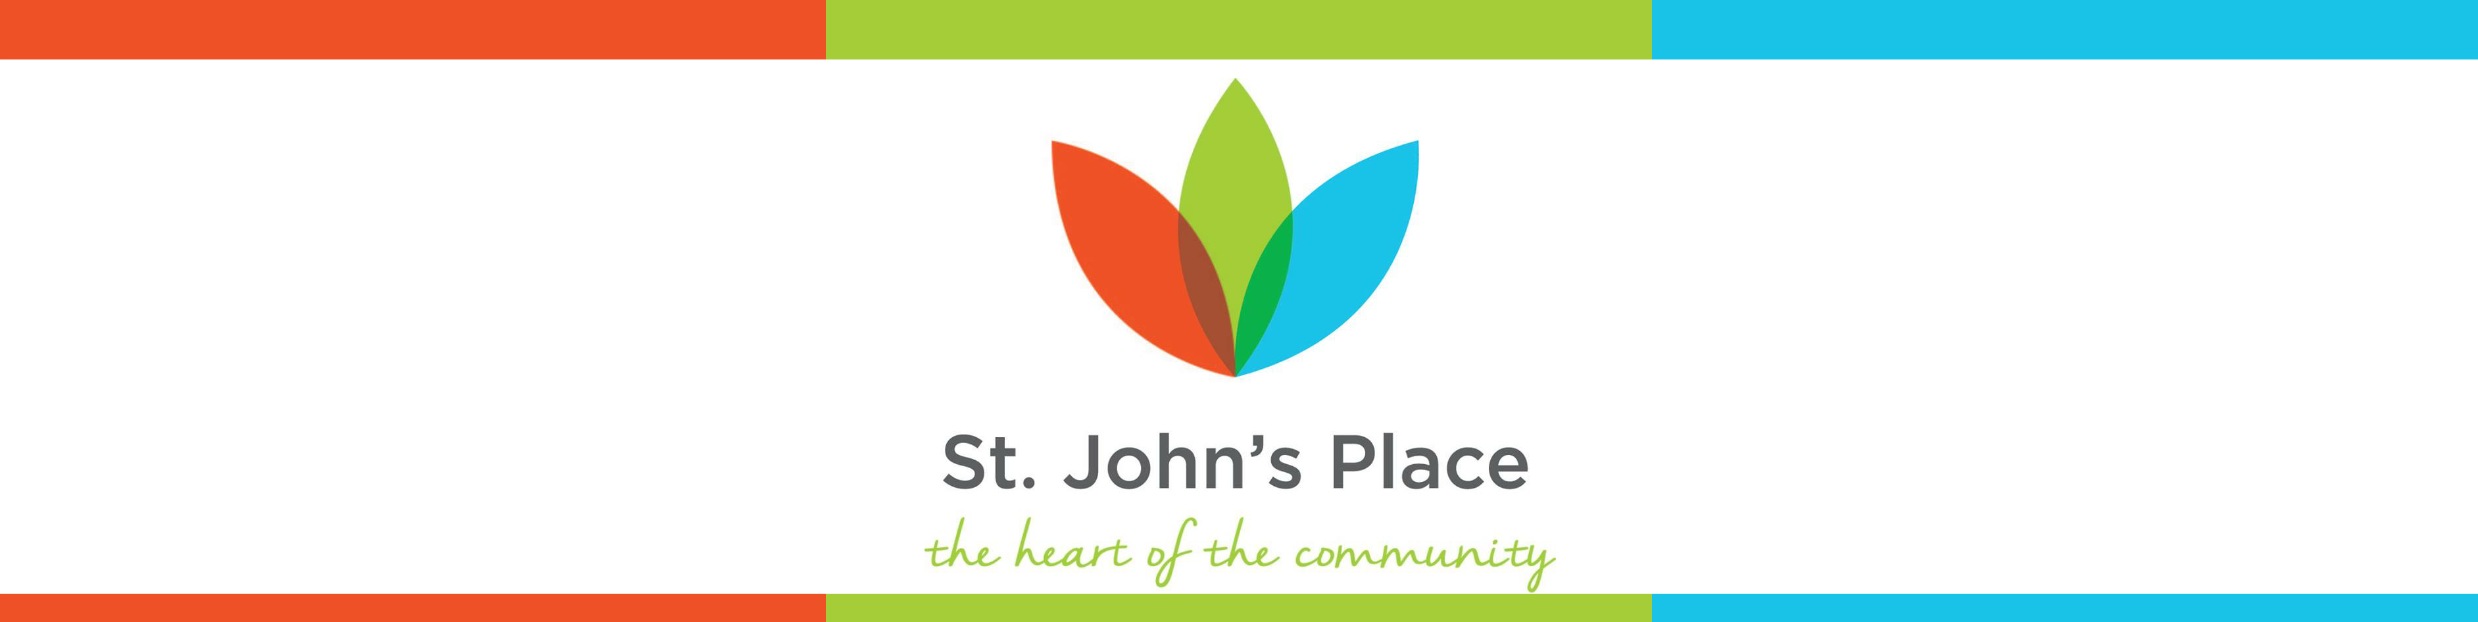 Come and see St John's Place Transformed